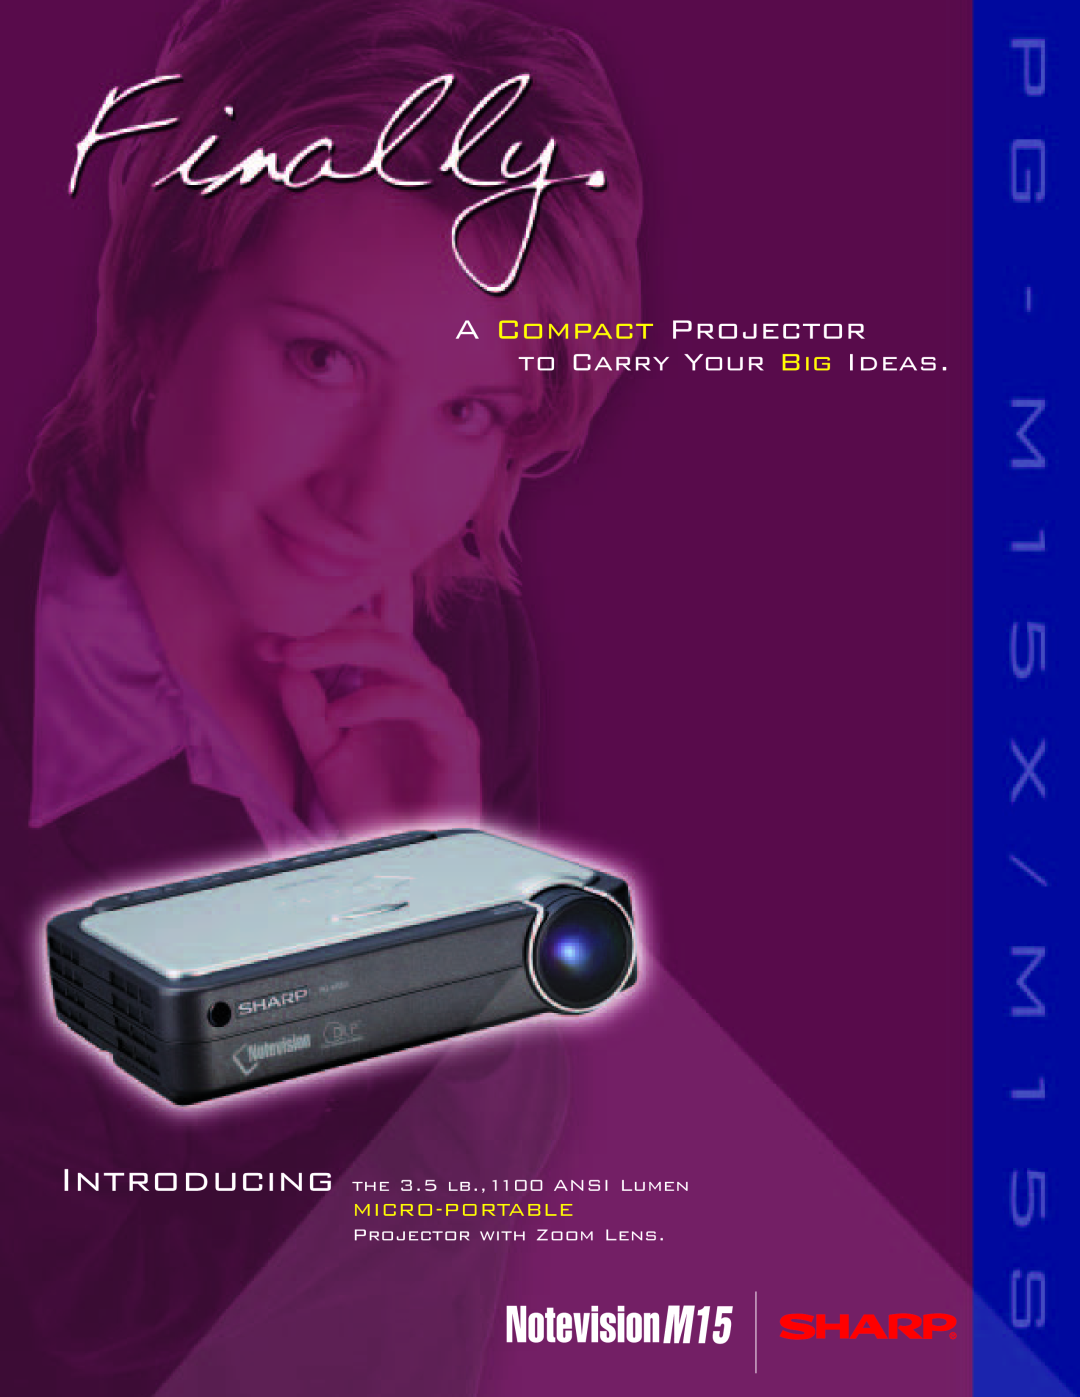 Sharp M15 manual A Compact Projector, to Carry Your Big Ideas, Micro-Portable, Introducing the 3.5 lb.,1100 ANSI Lumen 